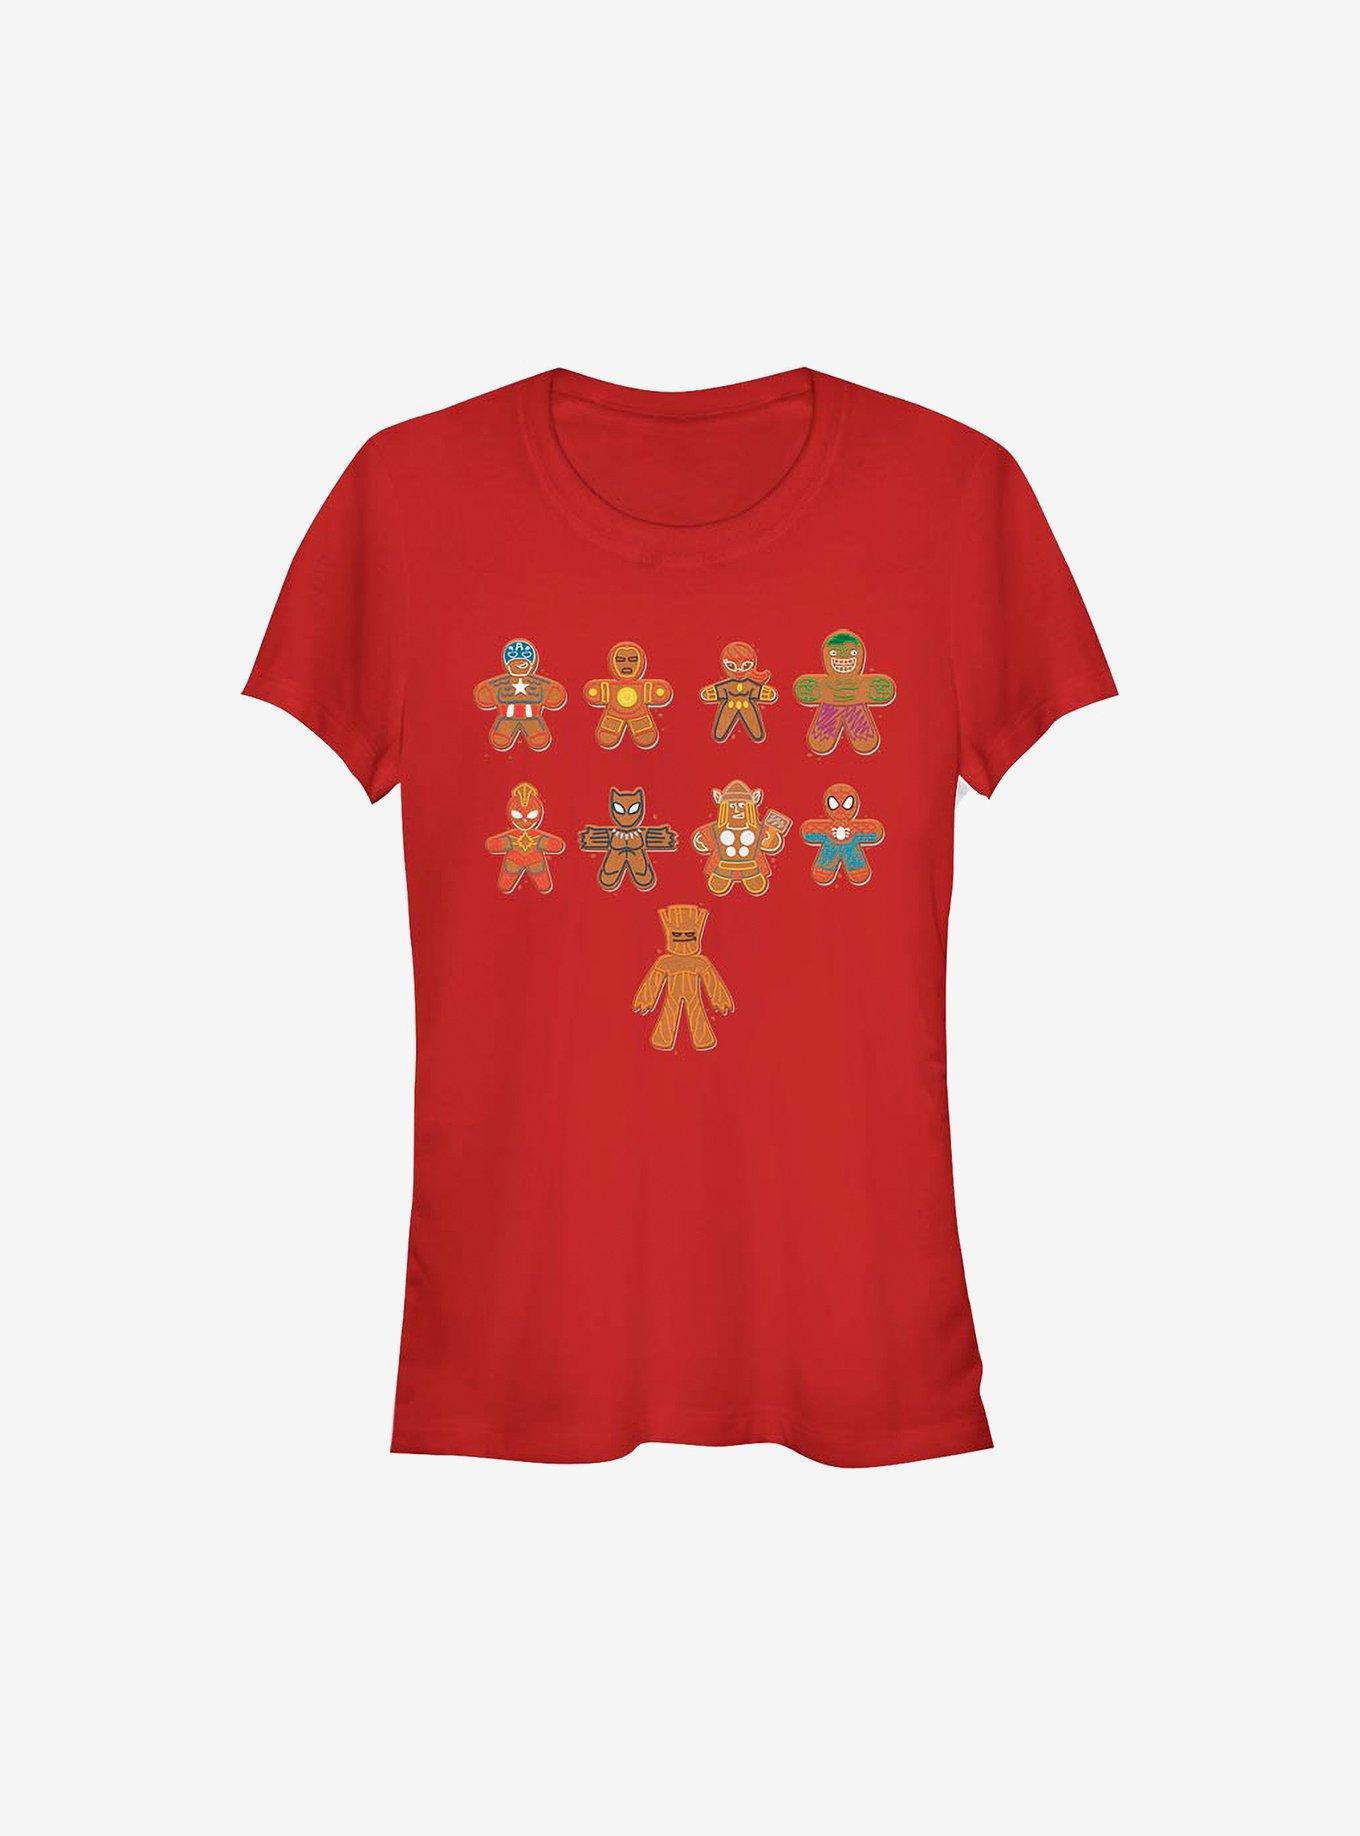 Marvel Avengers Lined Up Cookies Holiday Girls T-Shirt, RED, hi-res